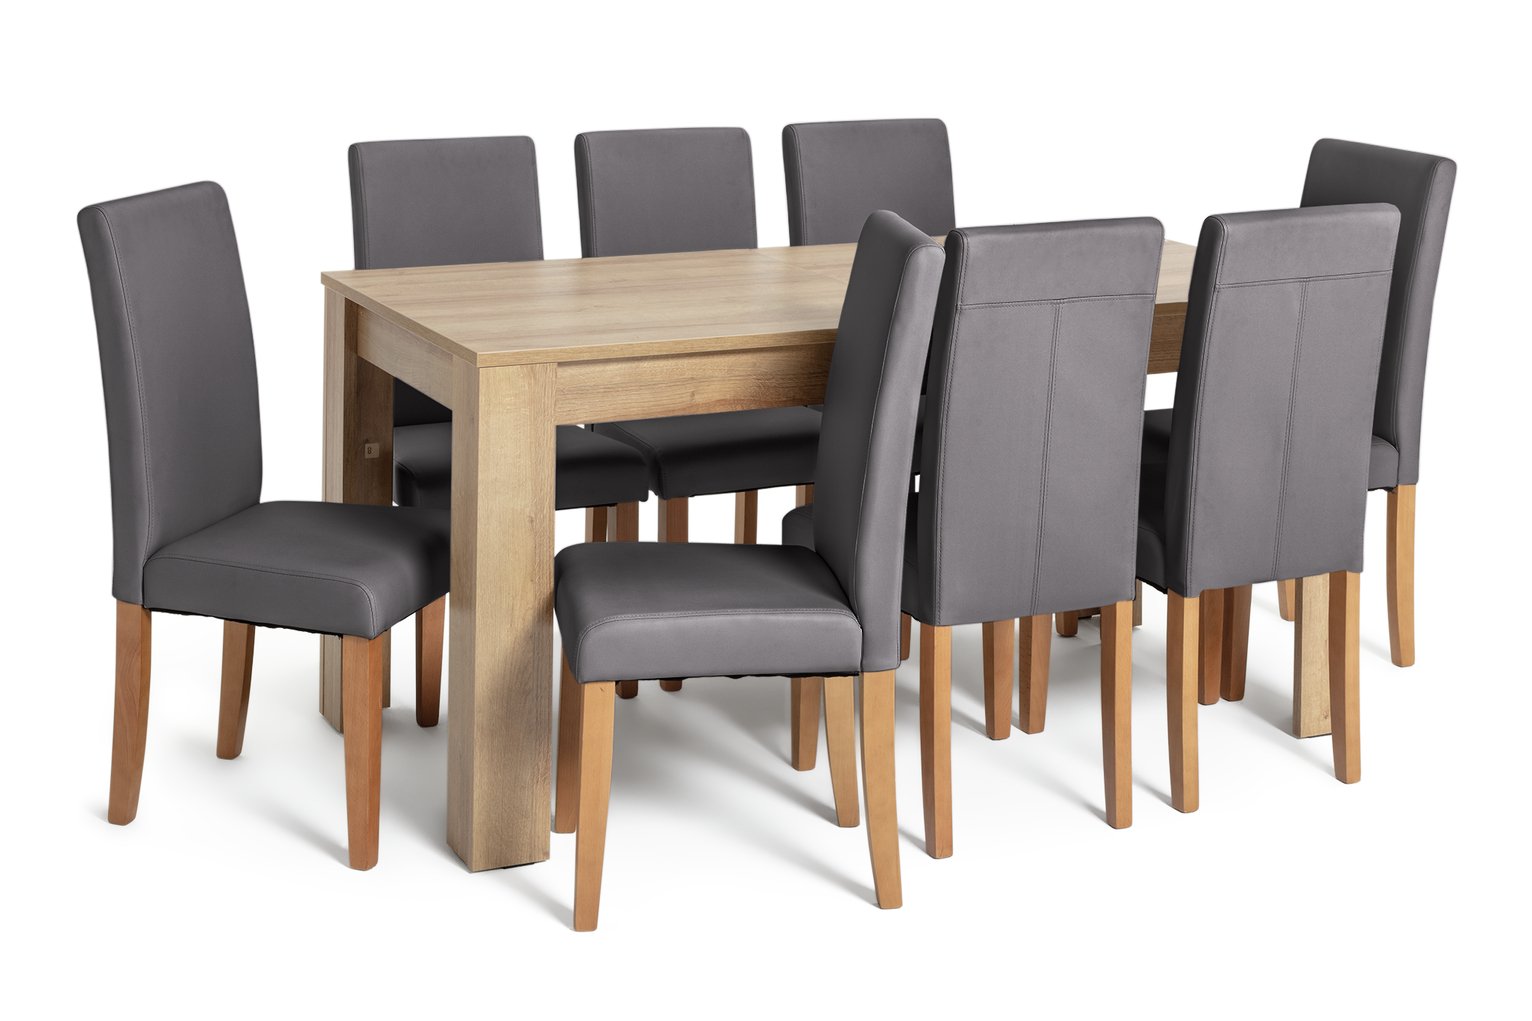 Argos Home Miami Extendable XL Dining Table 8 Chairs Reviews